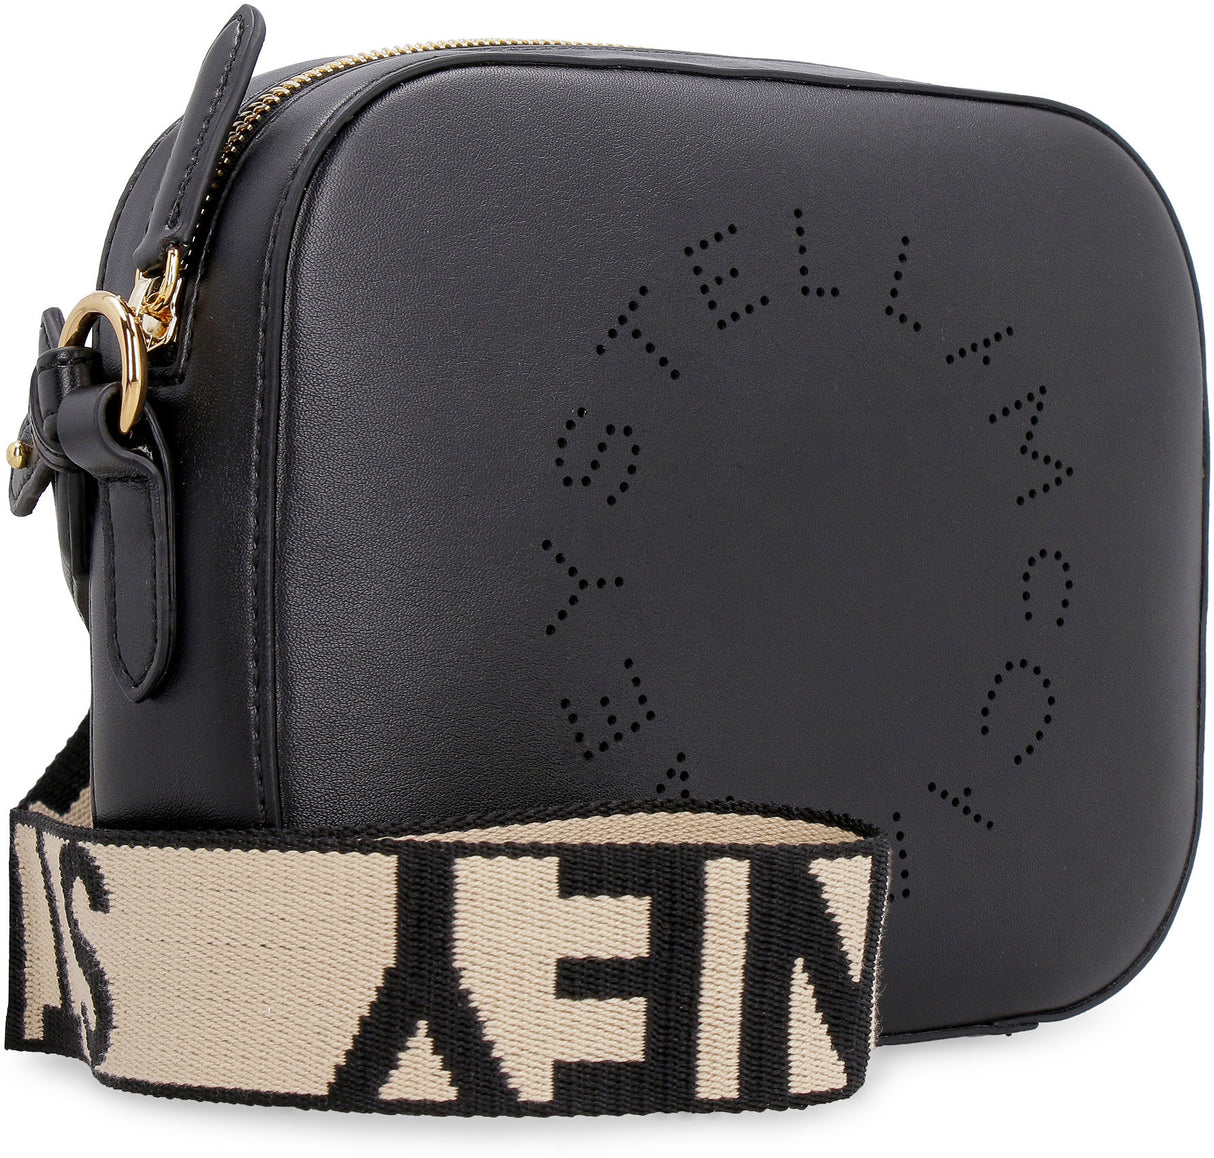 STELLA MCCARTNEY Faux Leather Camera Handbag with Perforated Logo and Gold-Tone Hardware for Women